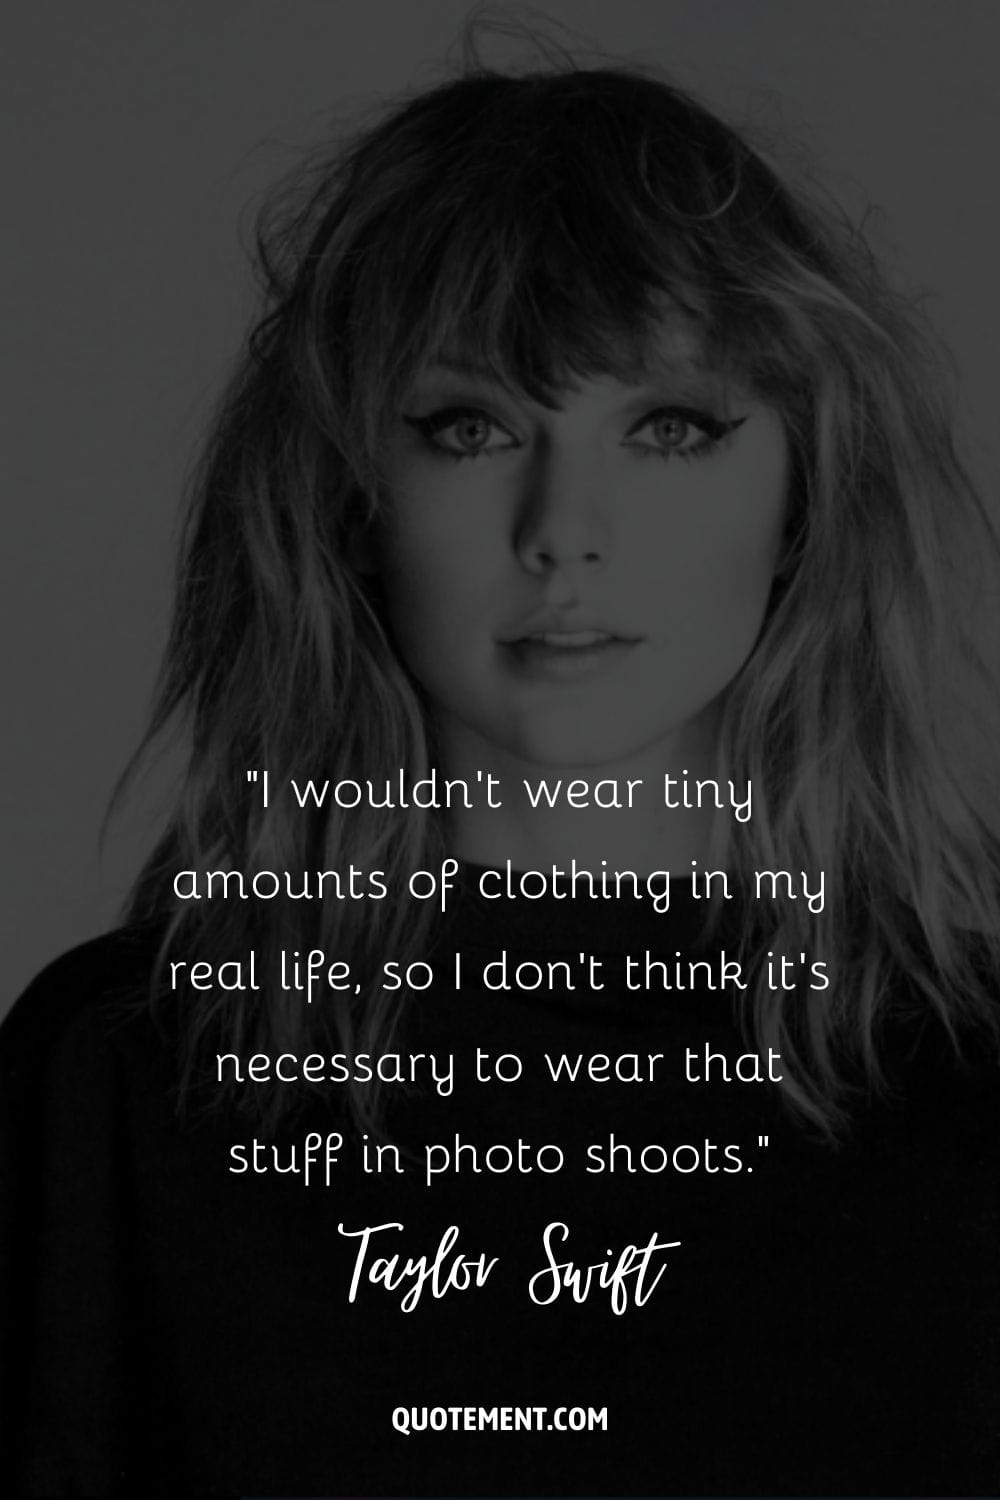 “I wouldn’t wear tiny amounts of clothing in my real life, so I don’t think it’s necessary to wear that stuff in photo shoots.” ― Taylor Swift